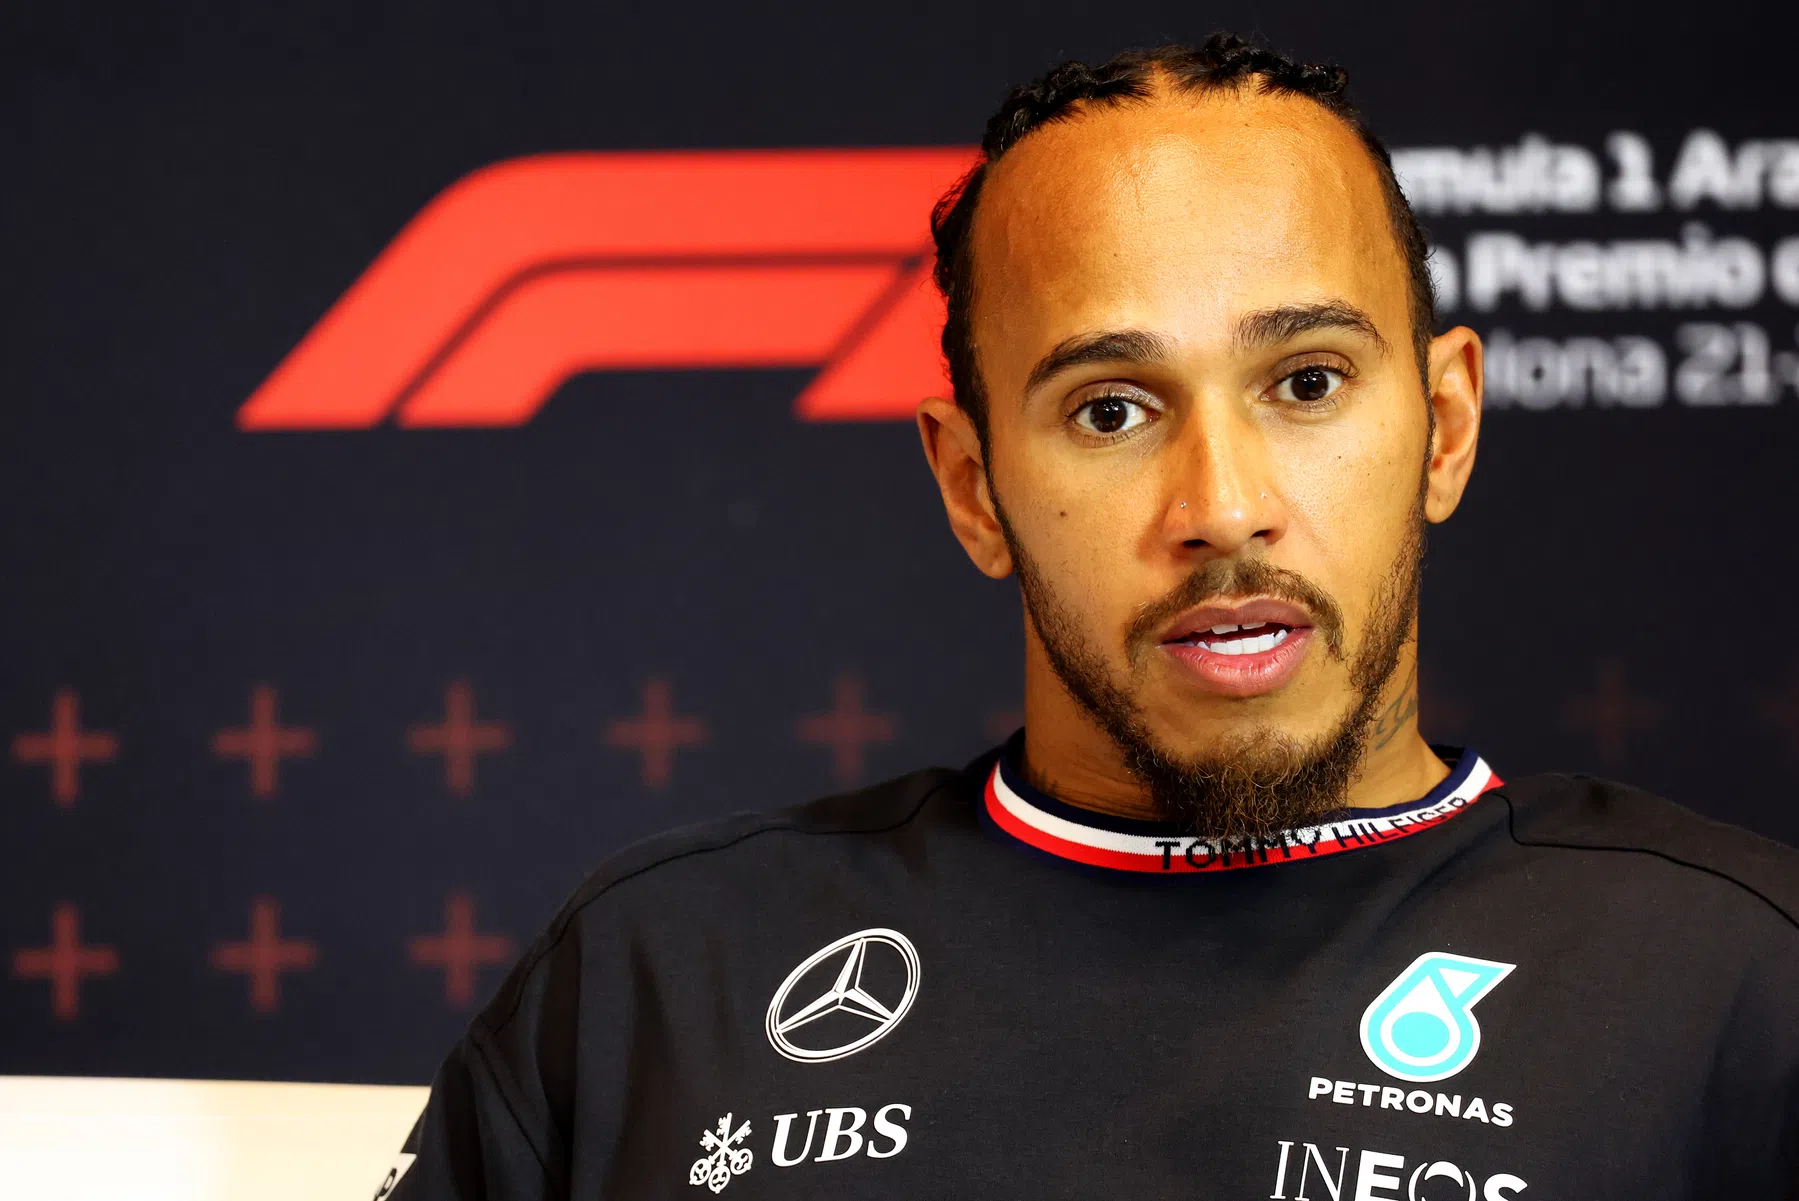 Lewis hamilton unsure if win is on the Horizon at Mercedes after Spanish GP